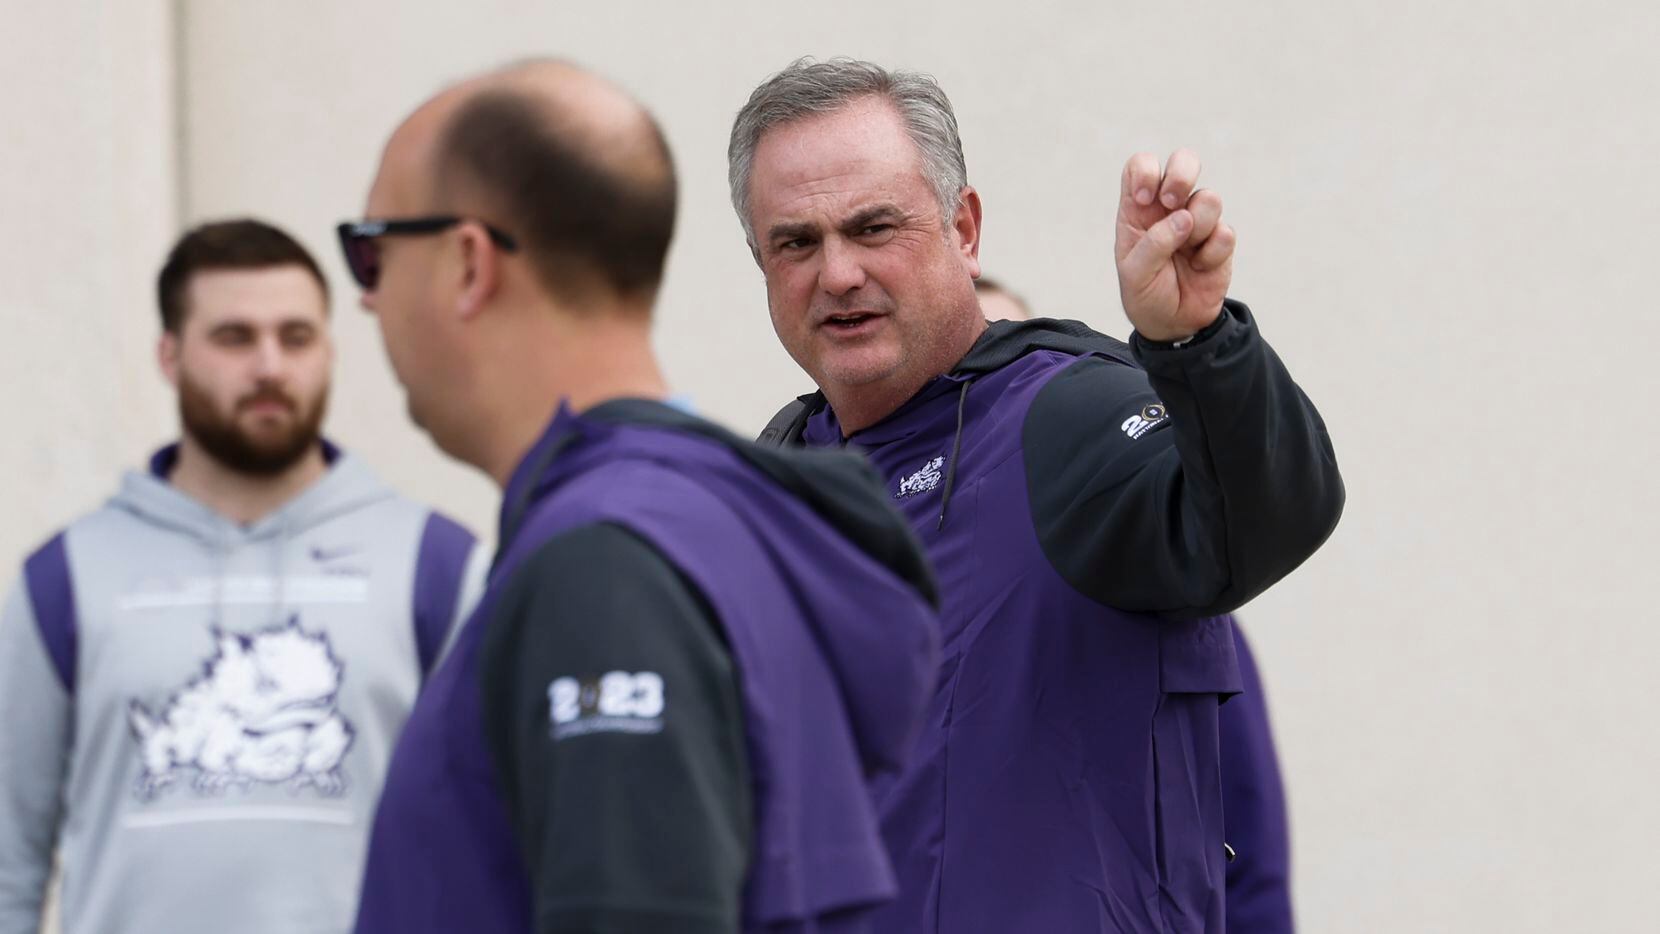 TCU coach Sonny Dykes does the Frogs' hand sign as he and other TCU football players,...